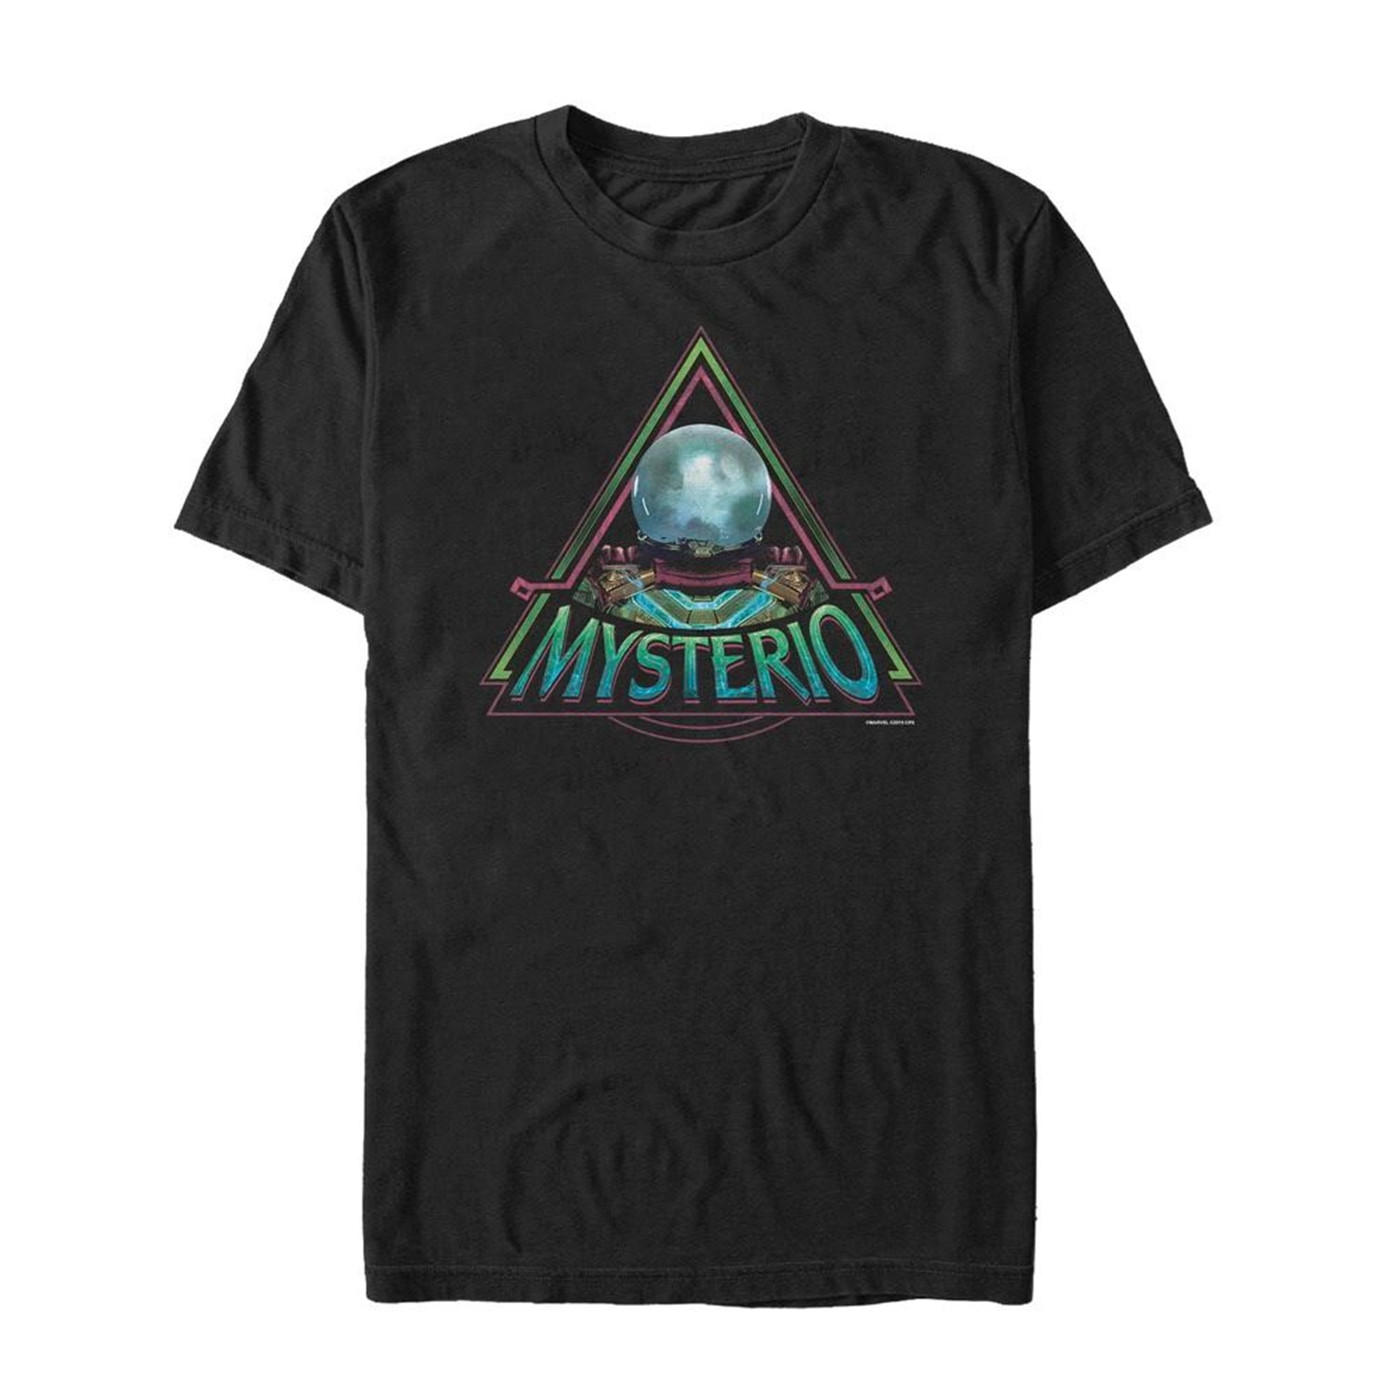 Spider-Man: Far From Home Mysterio Crystal Men's T-Shirt